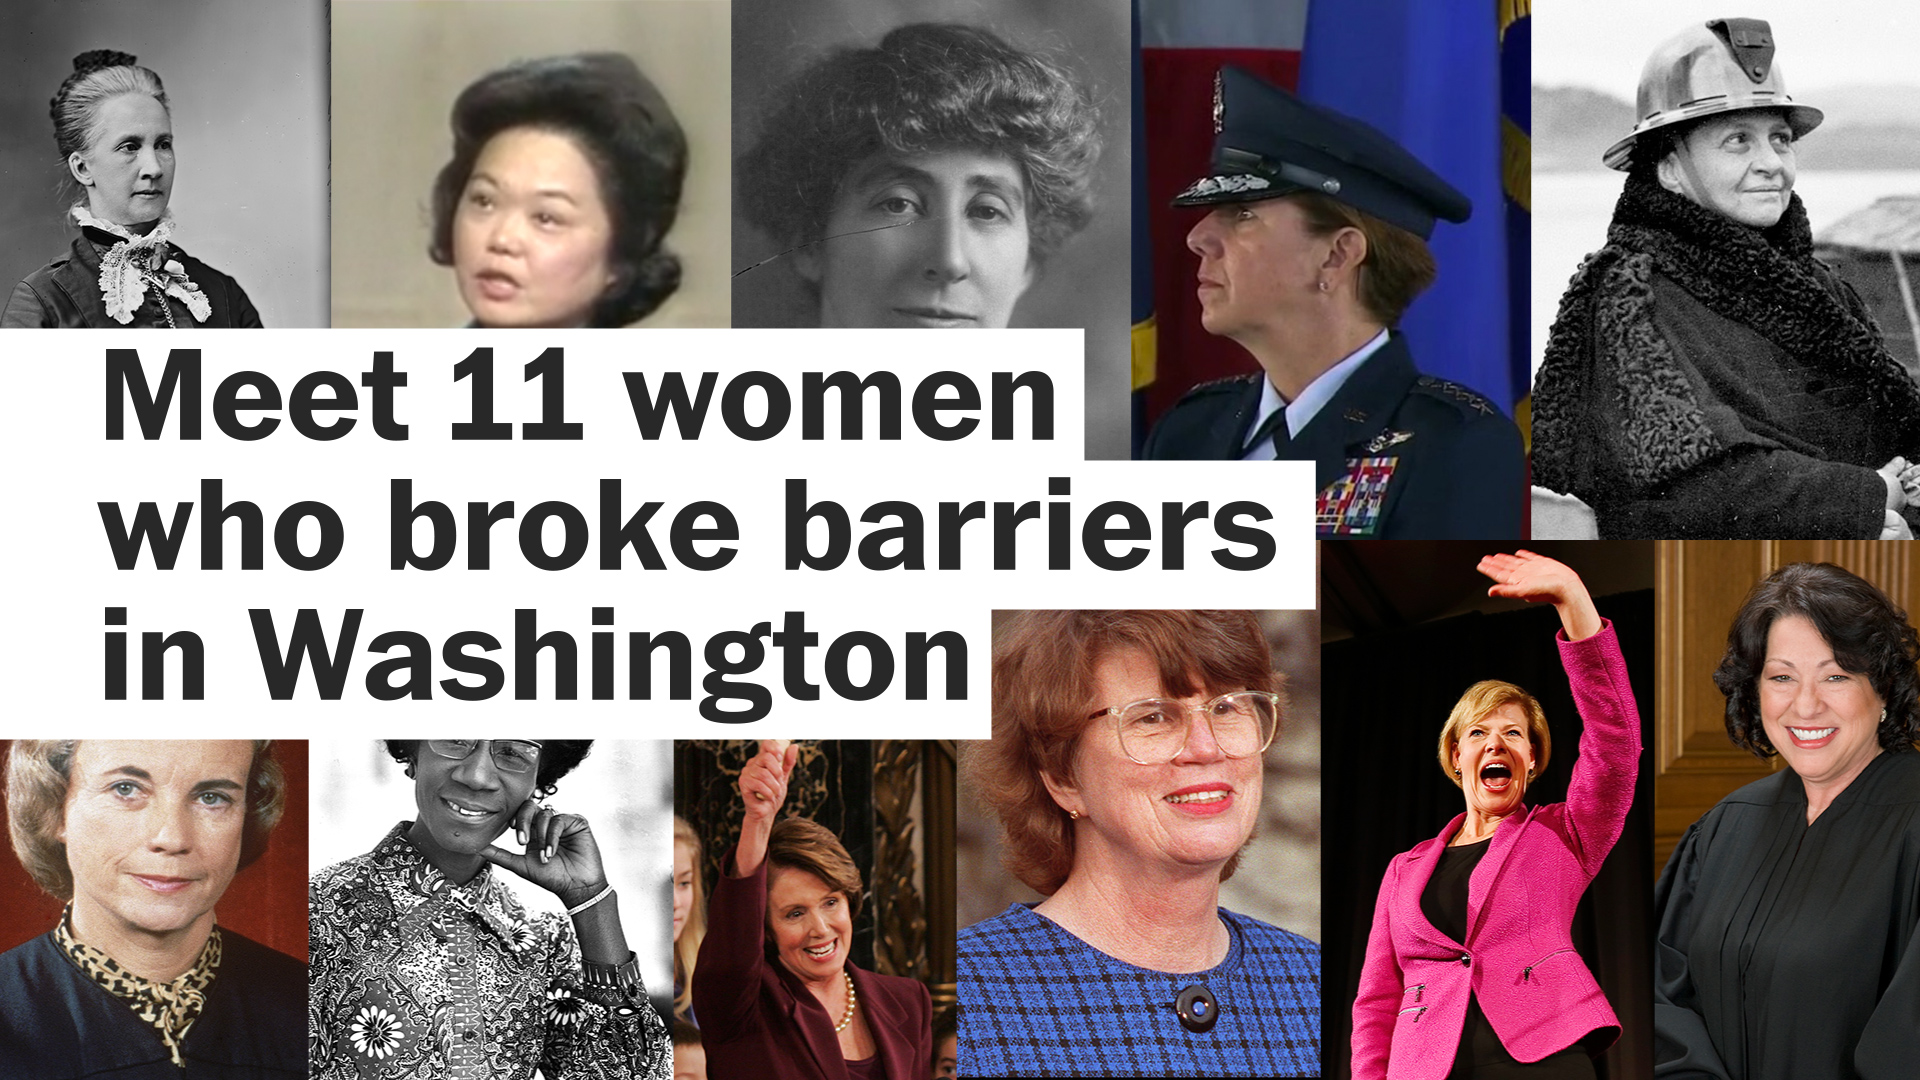 Women in Congress: From Jeanette Rankin in 1917 to more than 100 women in the House in 2019 - The Washington Post